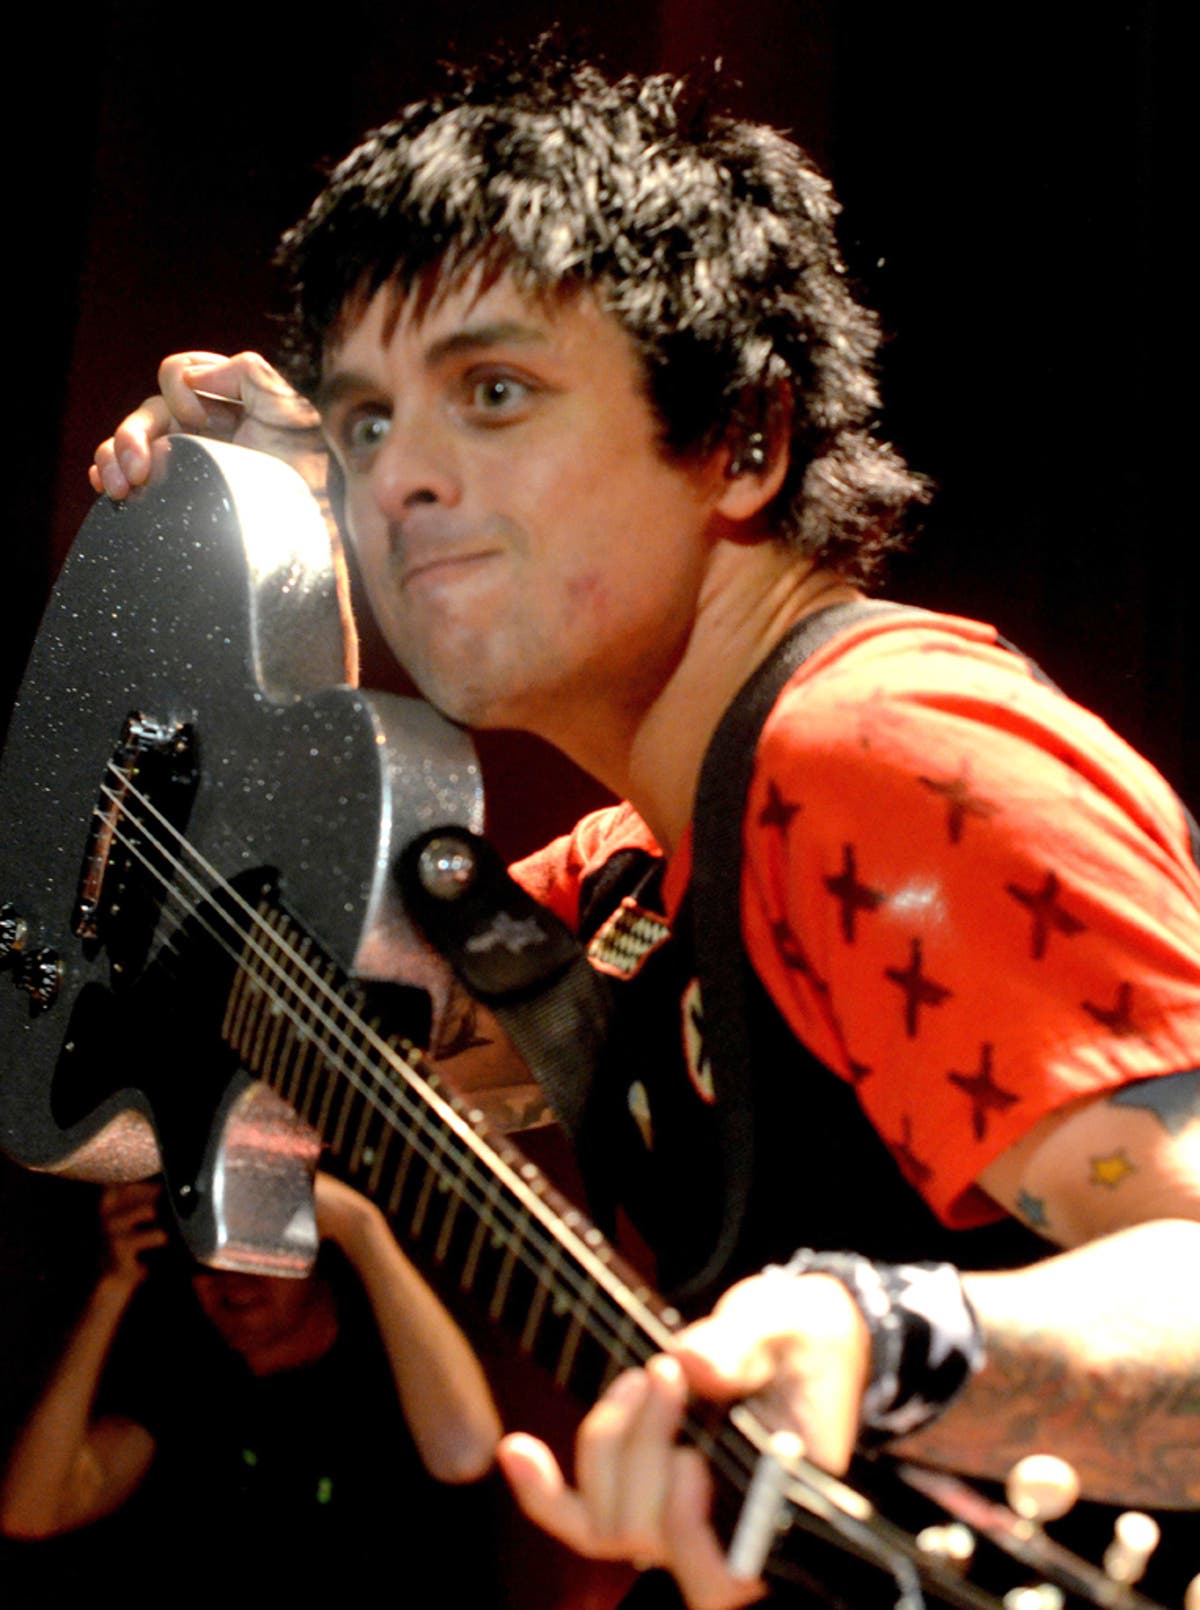 Green Day singer seeking treatment for substance abuse following